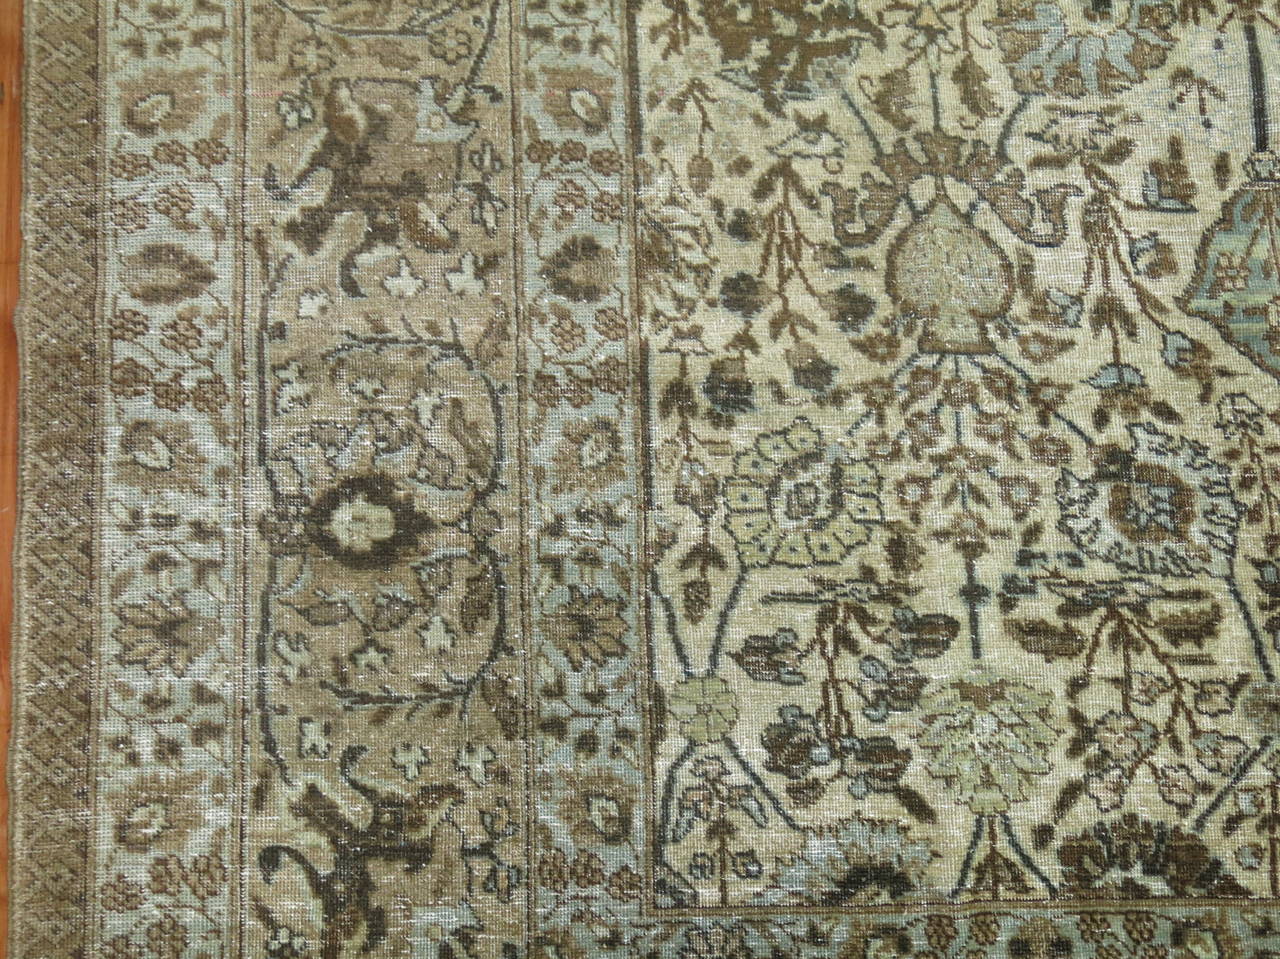 Neutral Antique Persian Tabriz Rug with Pictorial Animal Border 1